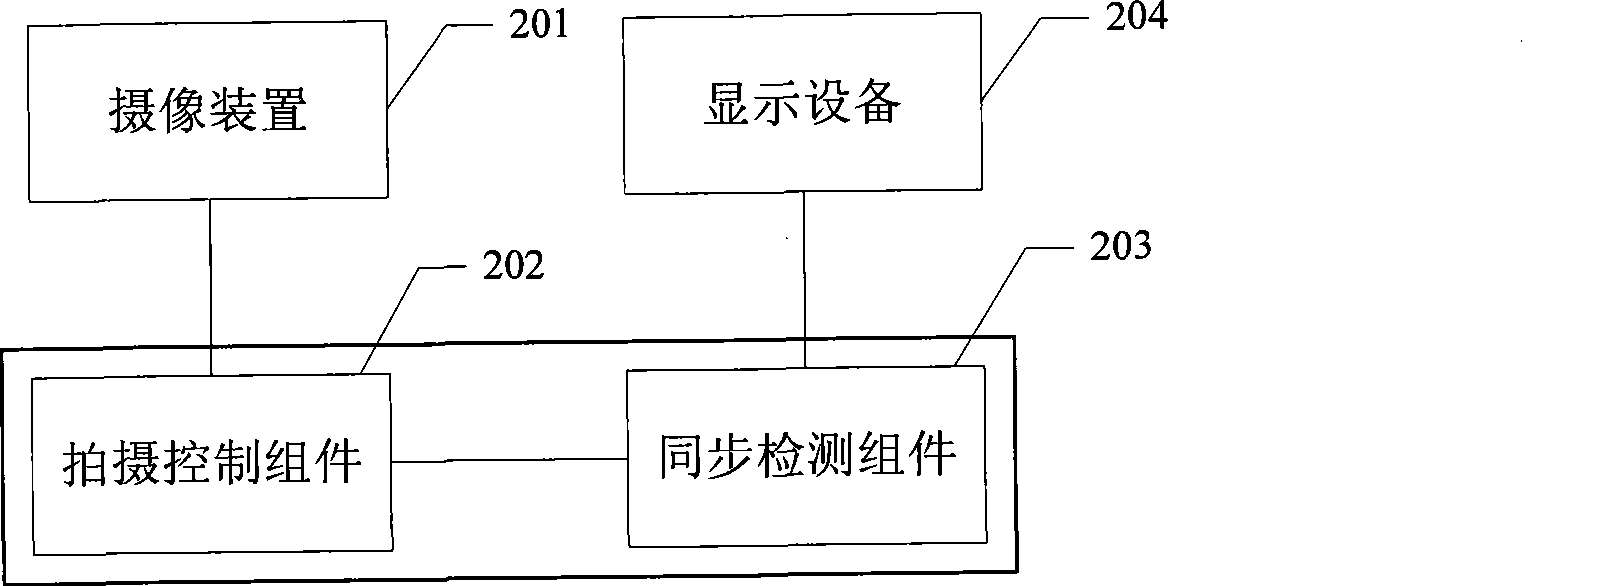 Shooting apparatus and method for display device